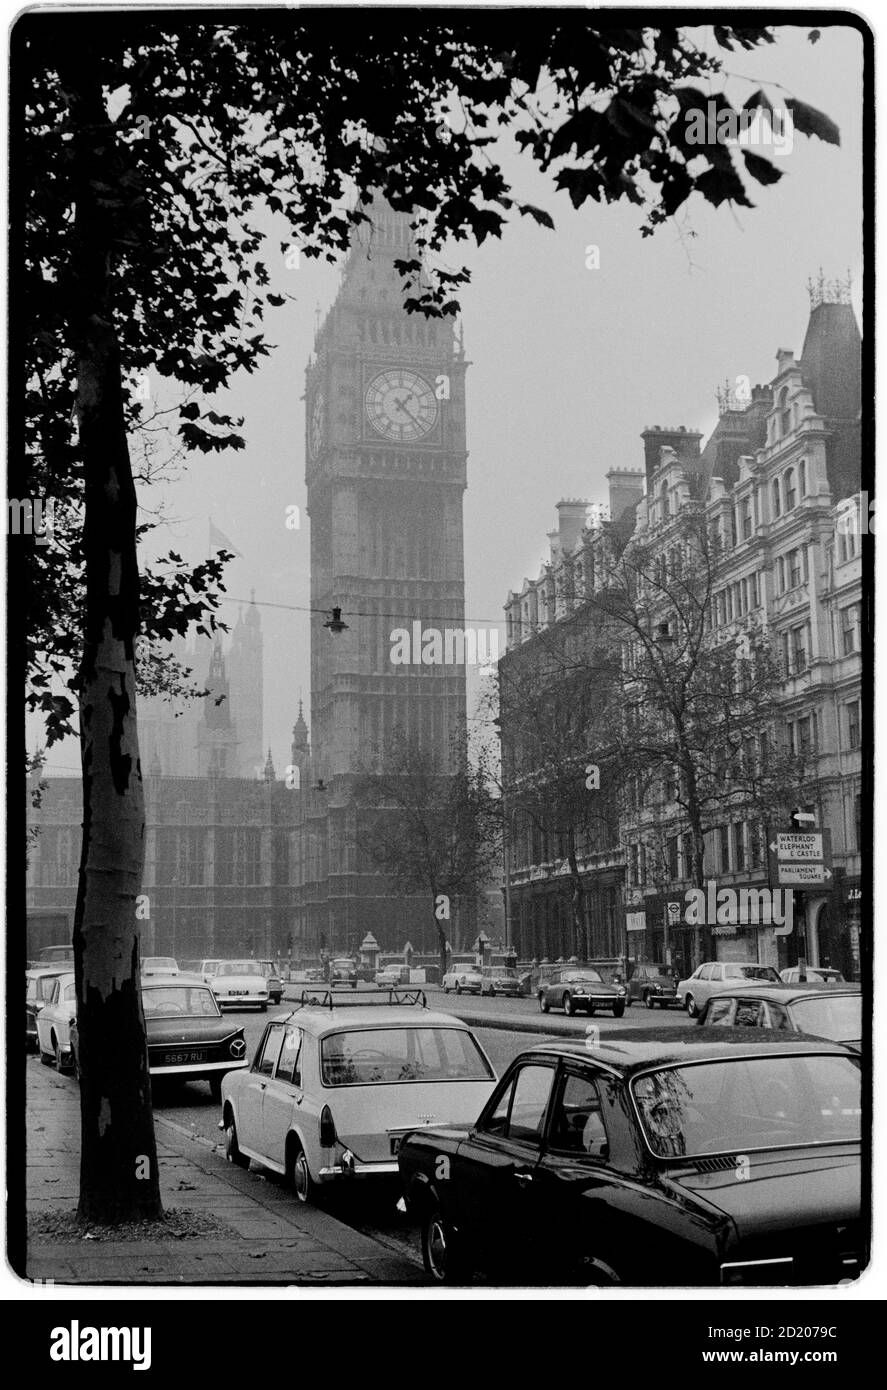 London views in the mist November 1968 Big Ben tower Westmister Houses iof Parliament Stock Photo